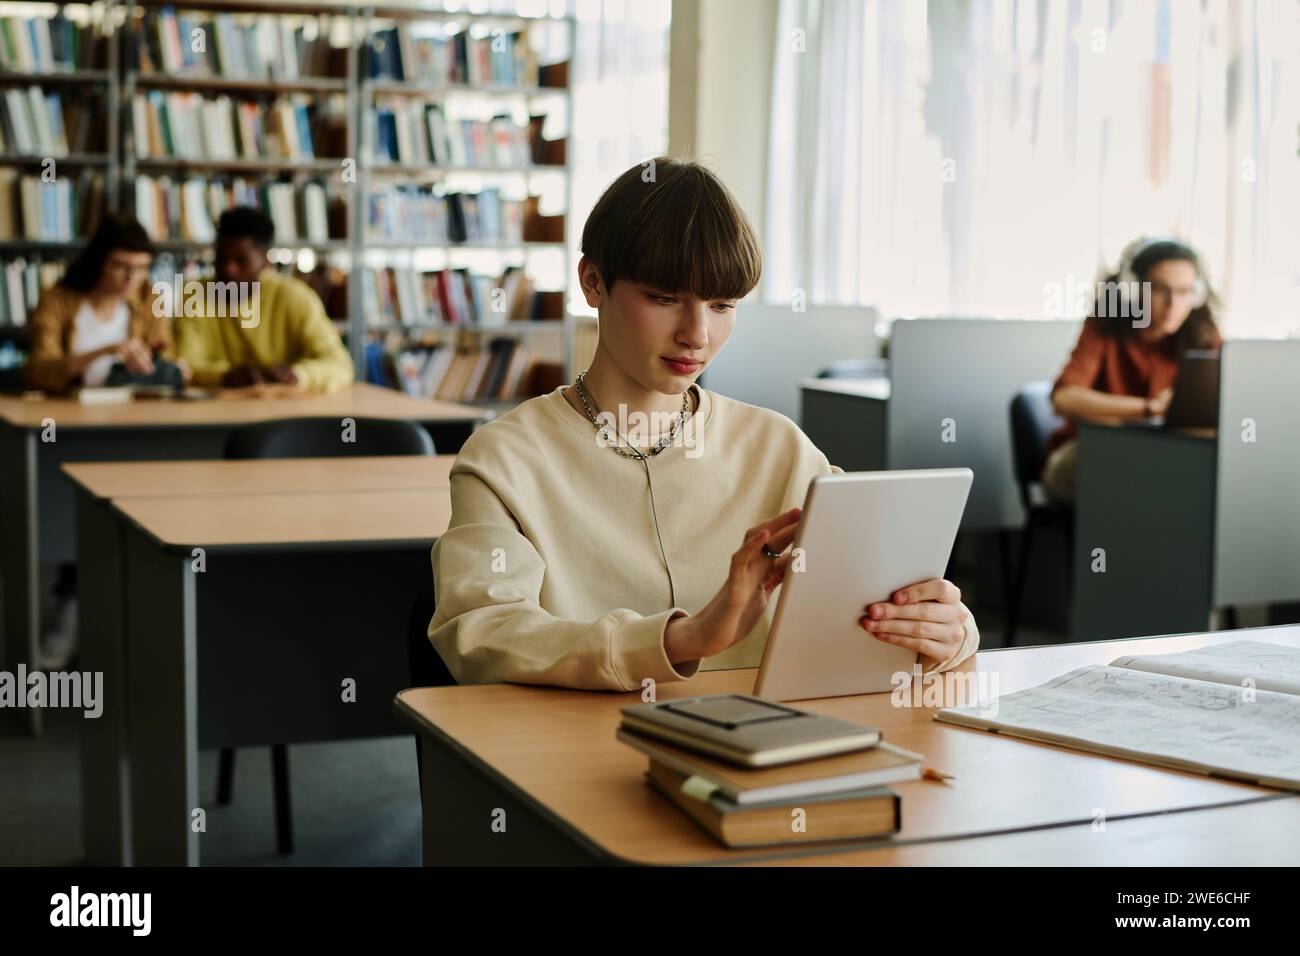 Young student using tablet PC at desk in library Stock Photo